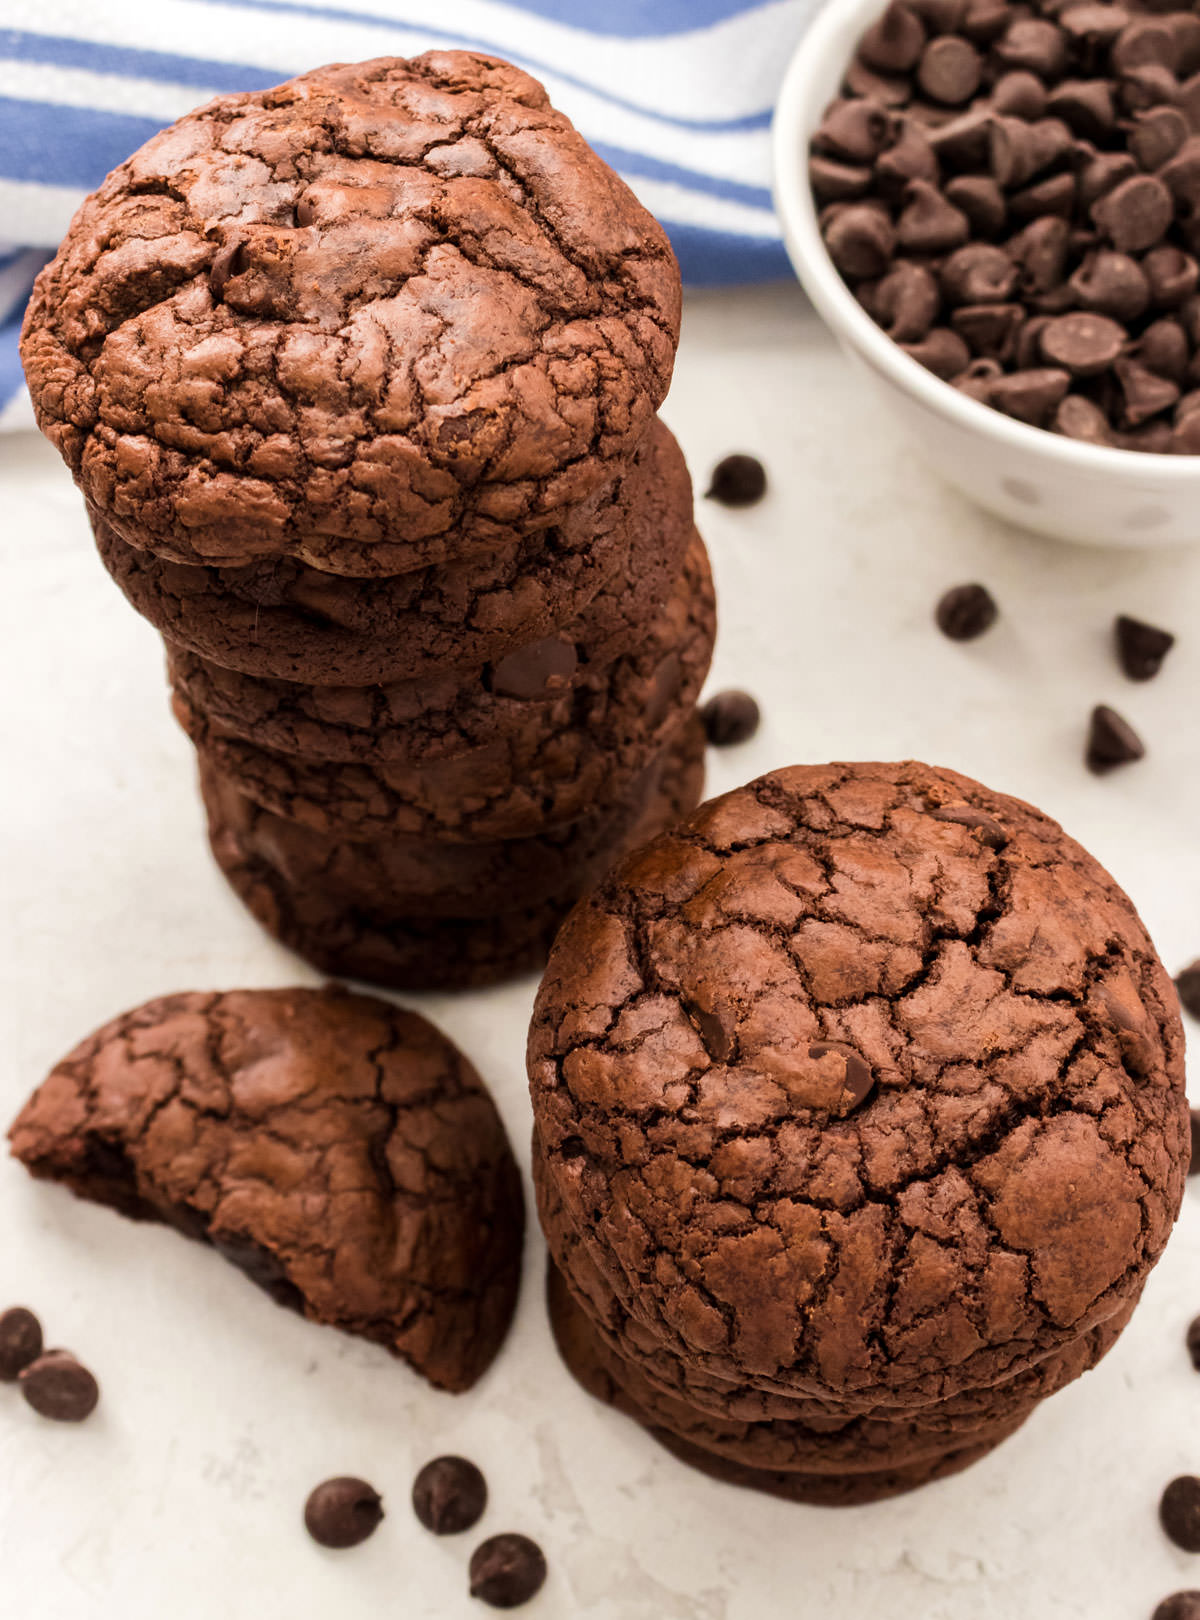 Closeup on two stacks of Brownie Cookies sitting on a white table in front of a bowl of chocolate chips.